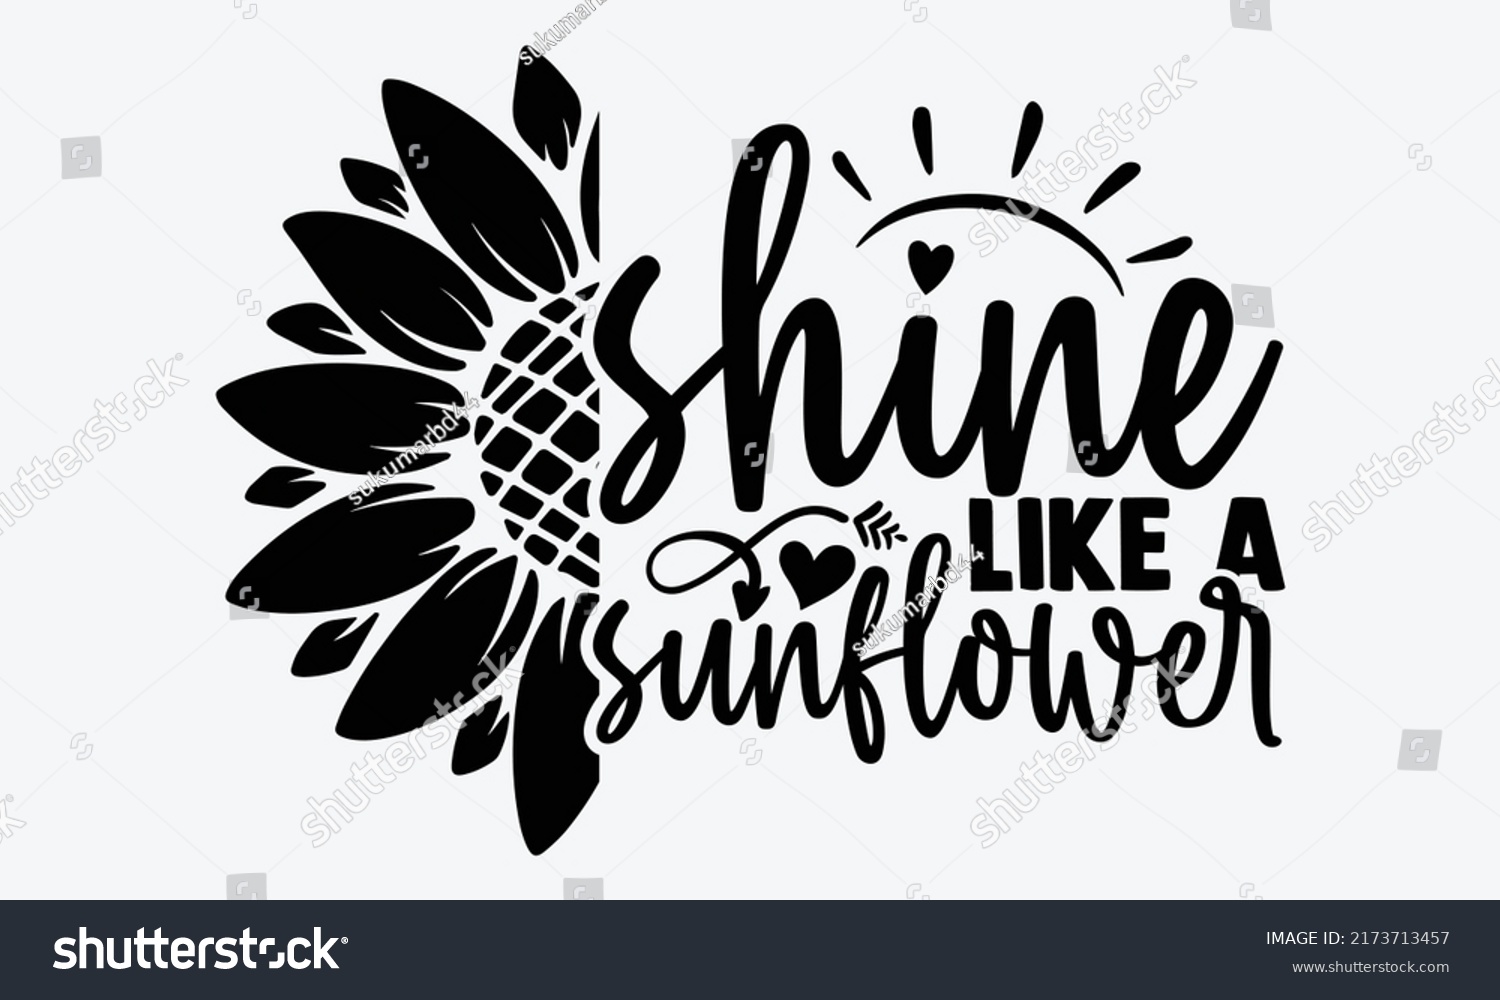 SVG of Shine like a sunflower - Sunflower t shirts design, Hand drawn lettering phrase, Calligraphy t shirt design, Isolated on white background, svg Files for Cutting Cricut and Silhouette, EPS 10 svg